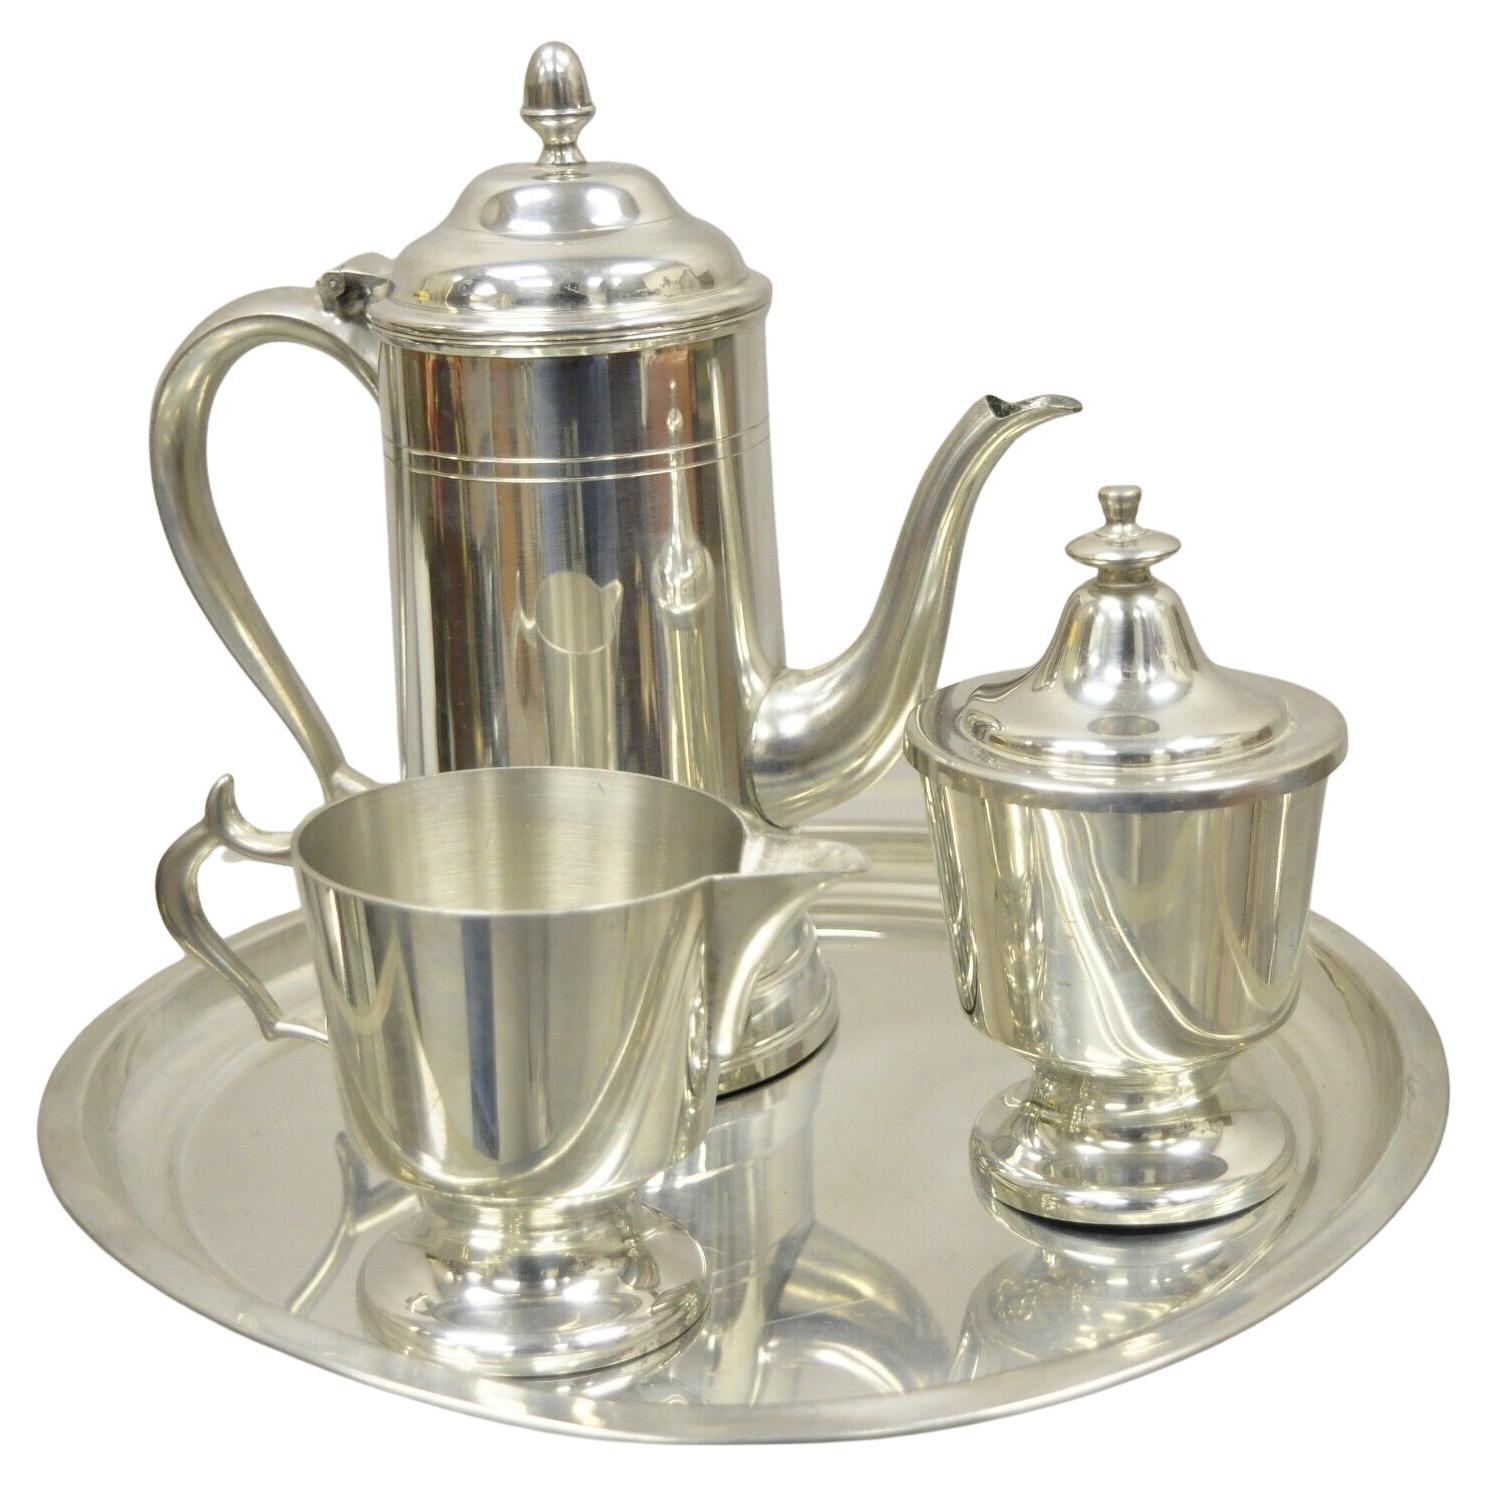 Vintage Woodbury Pewter Henry Ford Museum Pewter Coffee Serving Set, 4 Piece Set For Sale